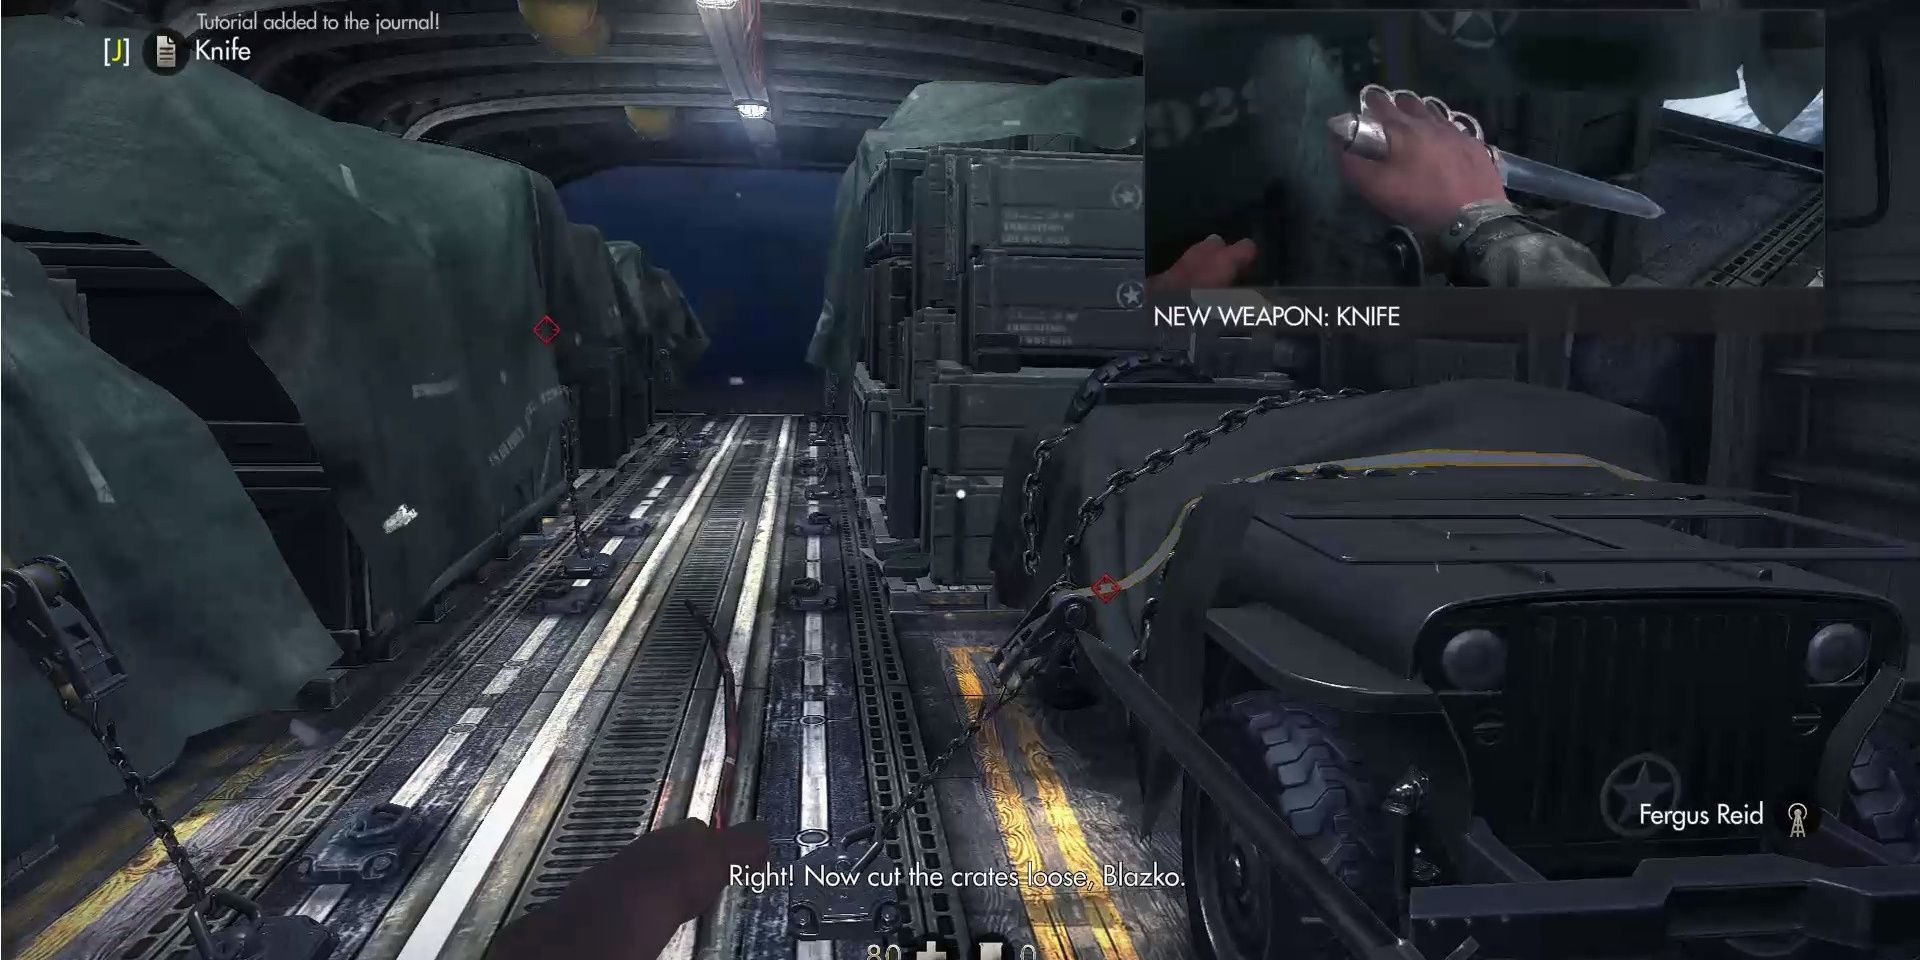 Image of the cargo hold on the plane in Wolfenstein: The New Order.